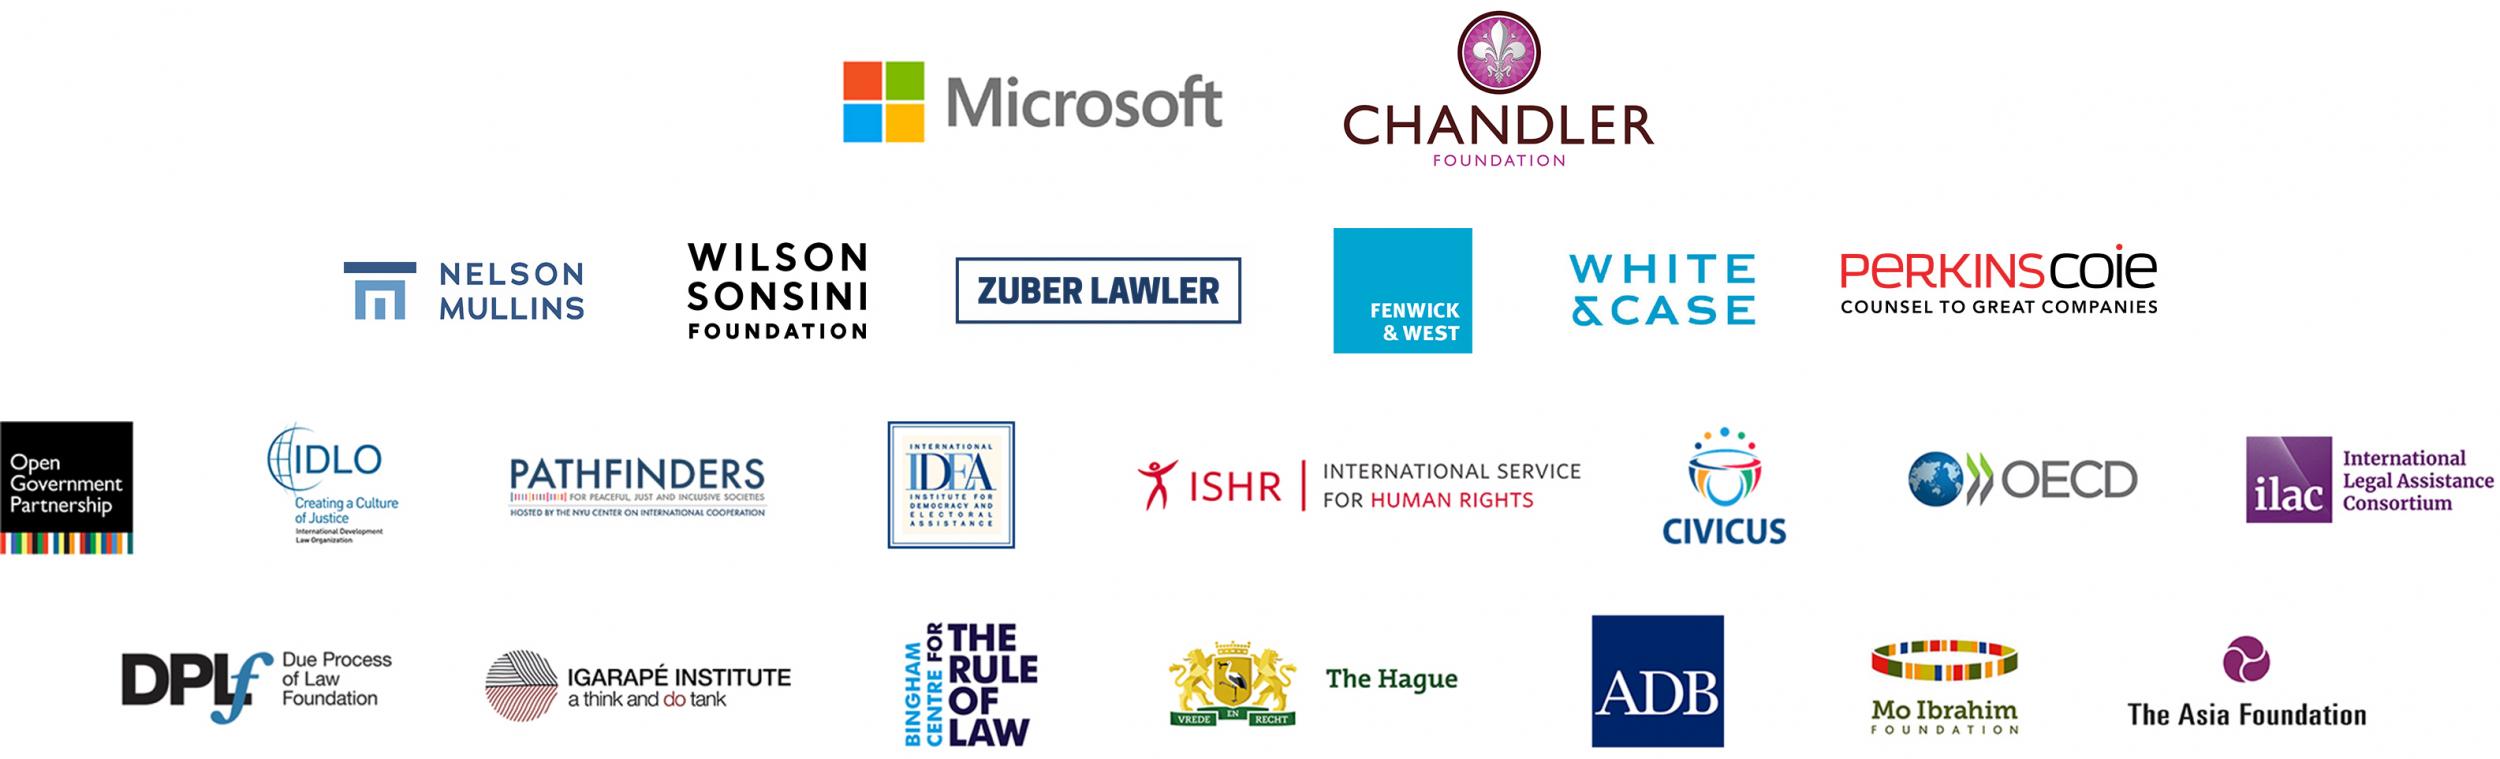 World Justice Challenge sponsors and partners